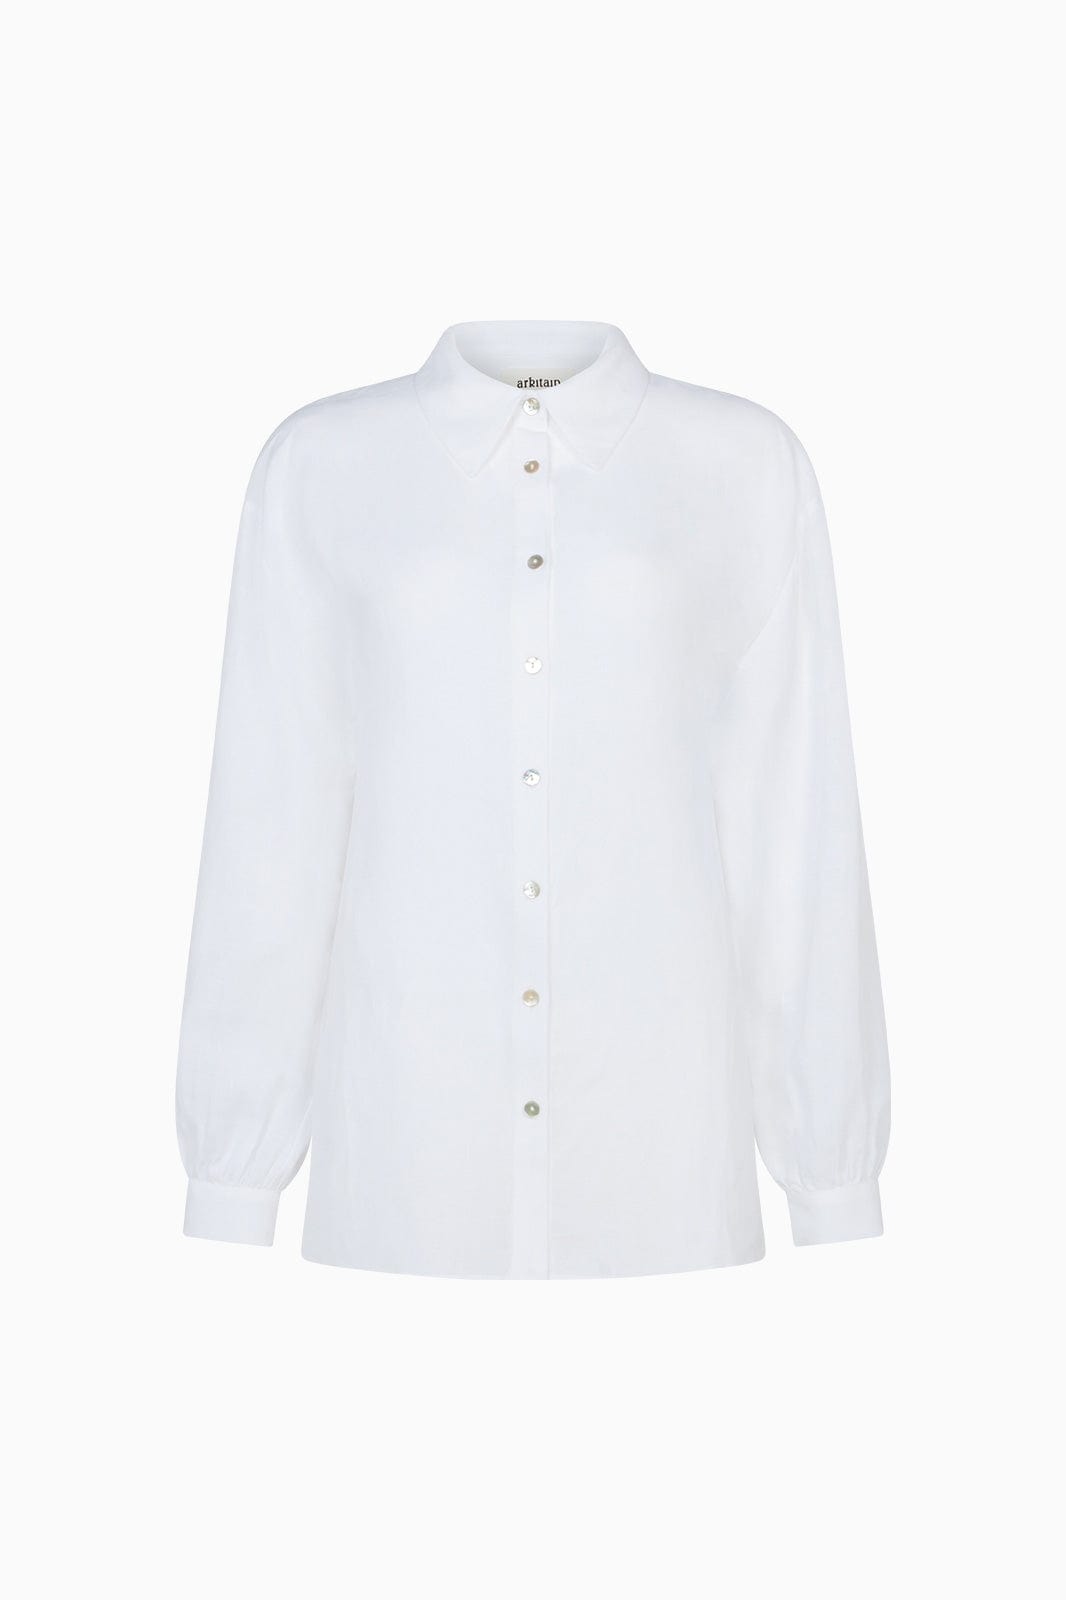 arkitaip Blouses The Blanca Lounge Shirt in white